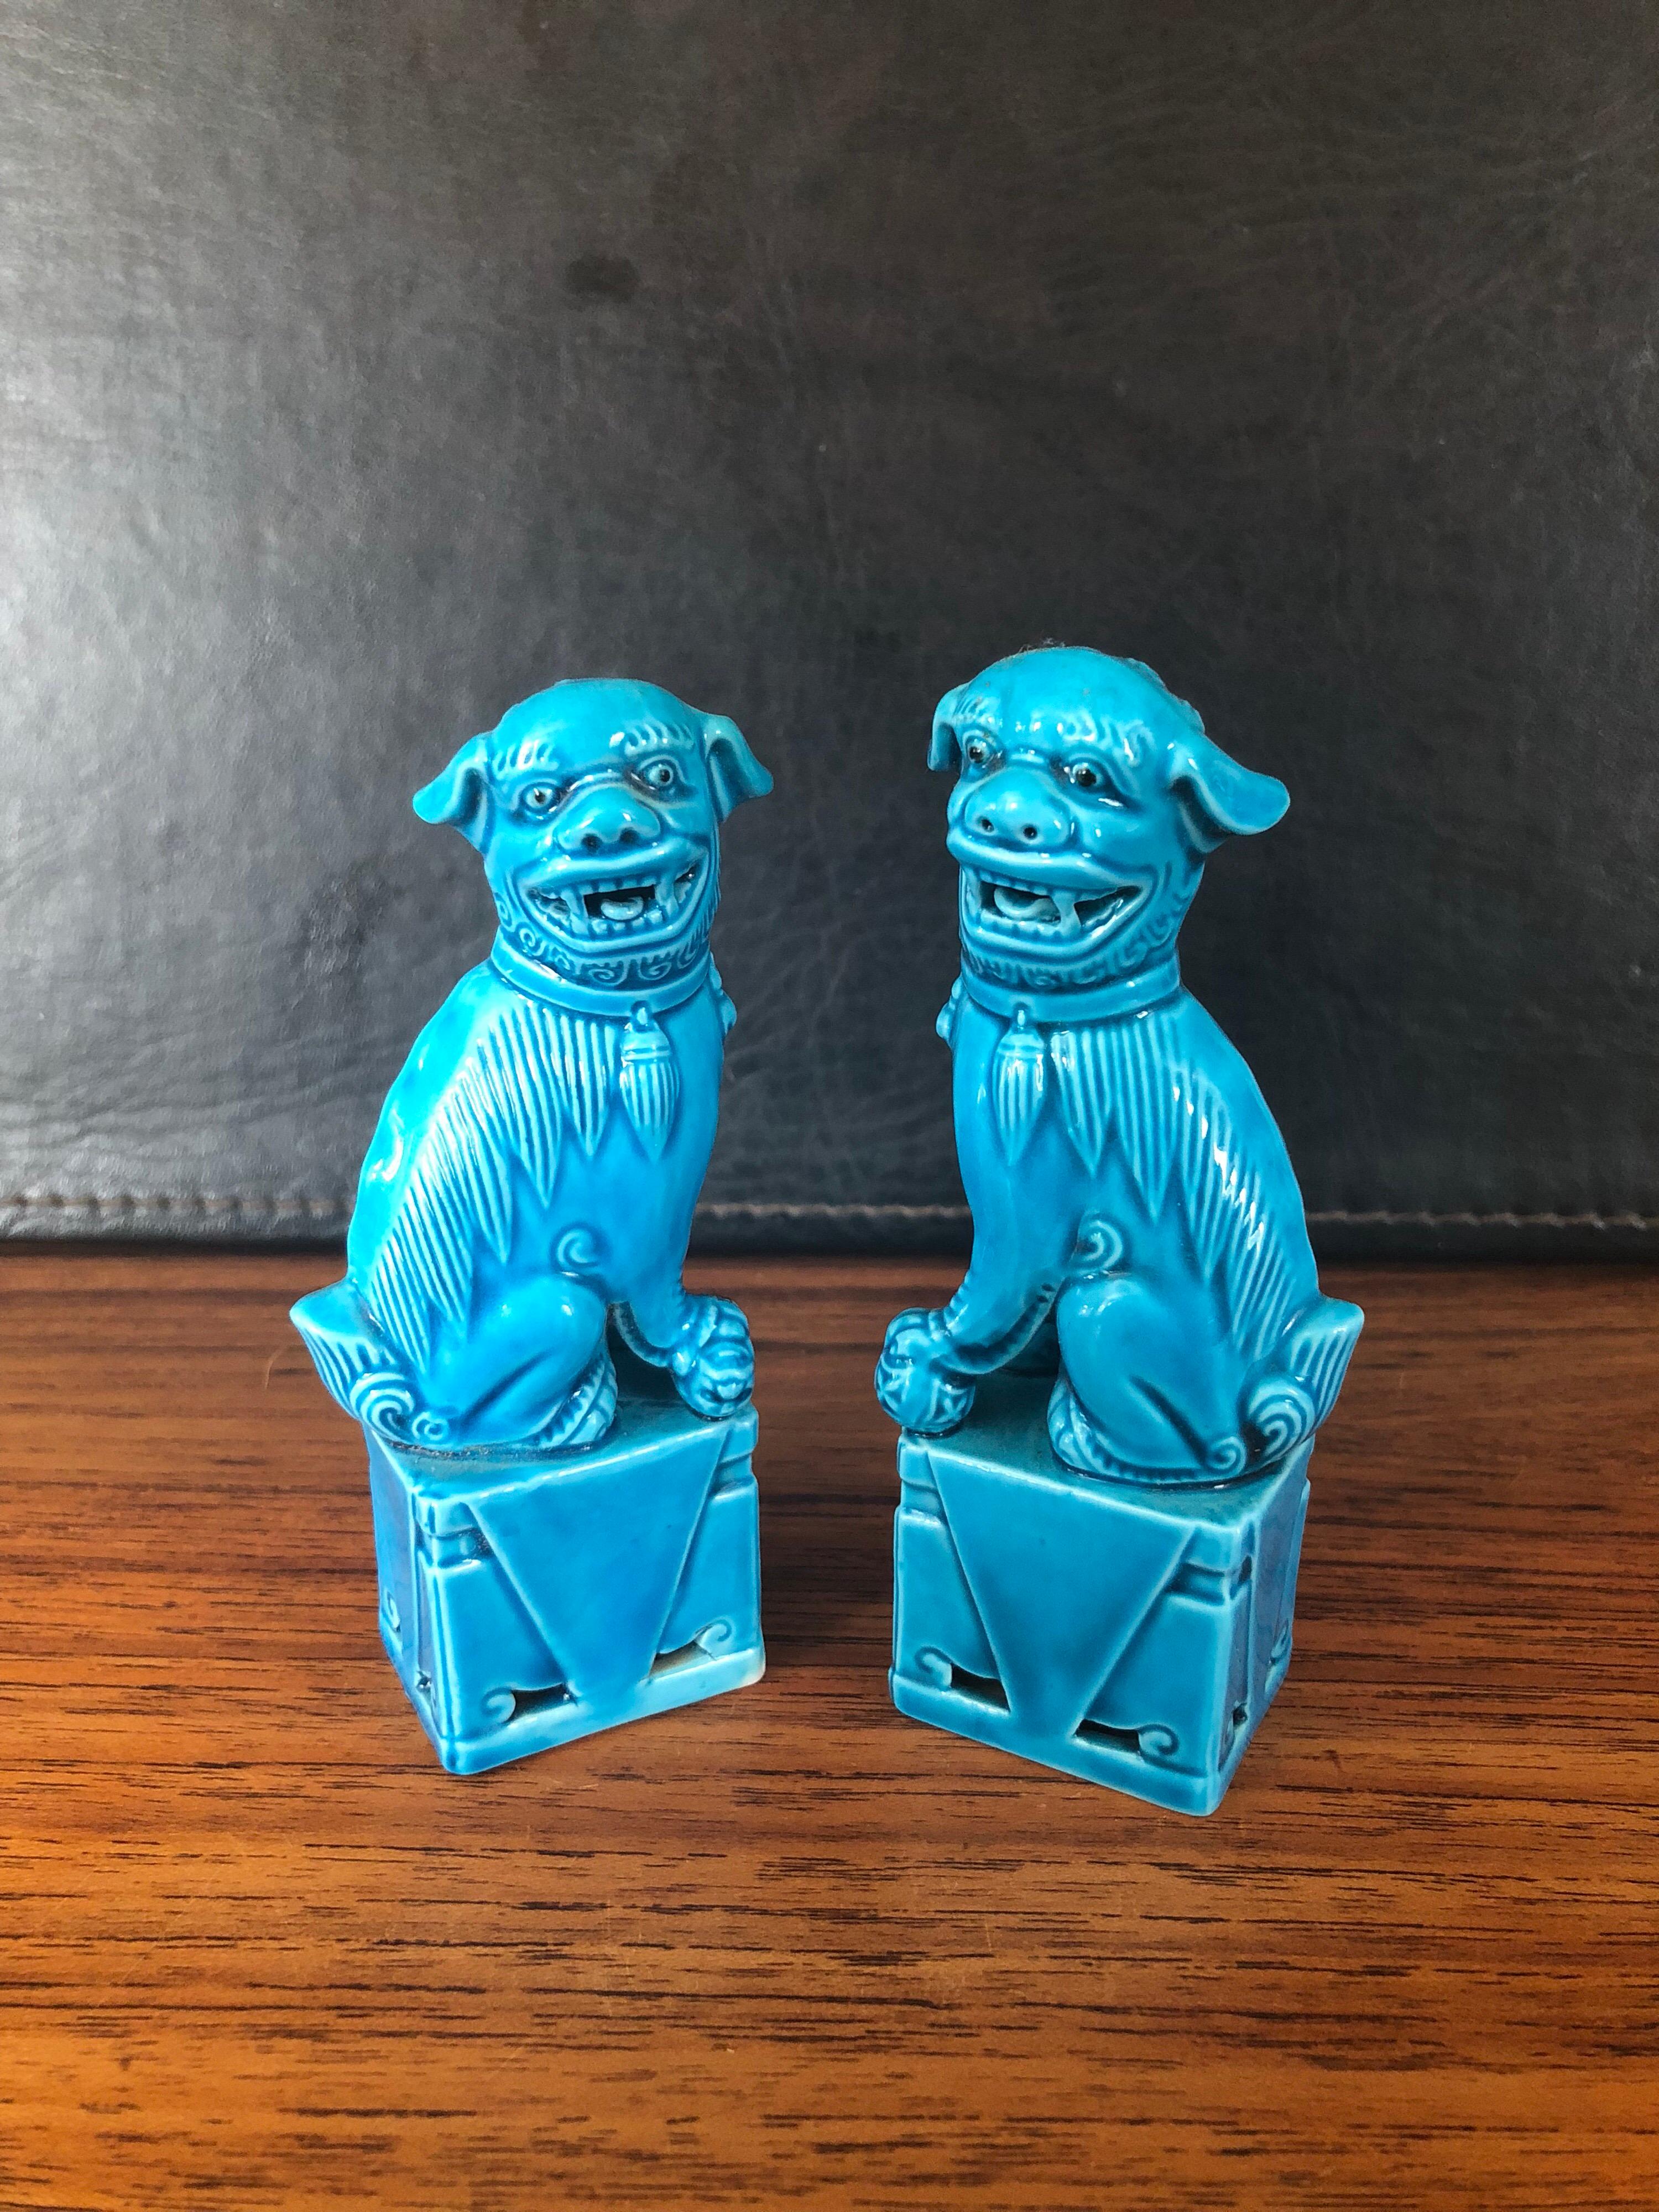 A very nice pair of vintage, mini, turquoise blue, ceramic foo dogs, circa 1970s. Excellent condition and patina; makes a fun decor item in any room!